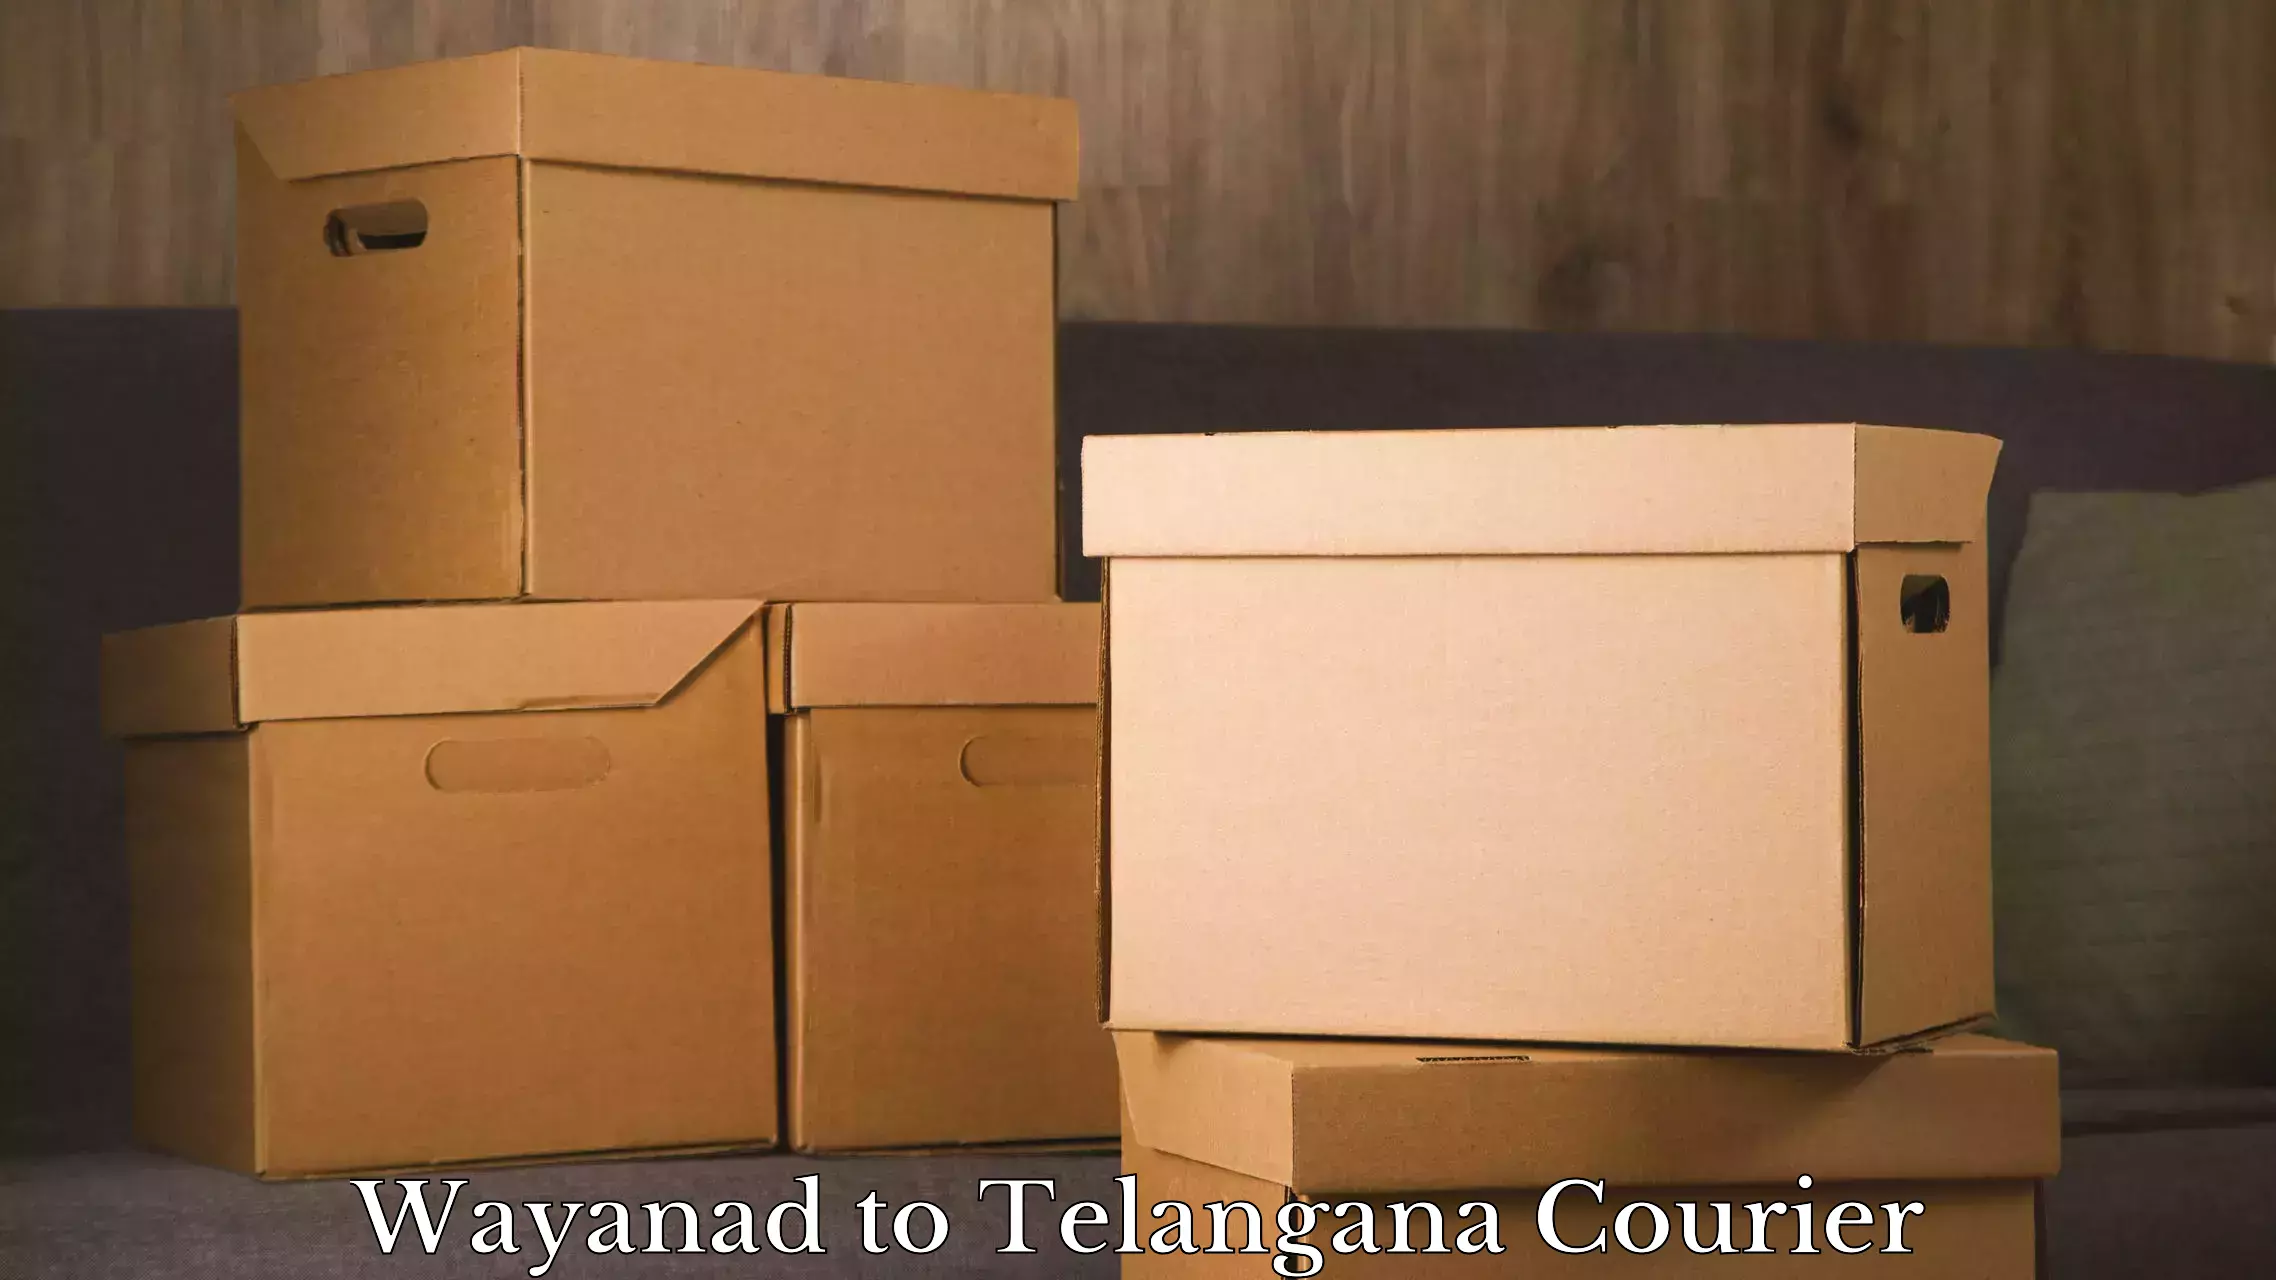 Luggage delivery app Wayanad to Bhainsa